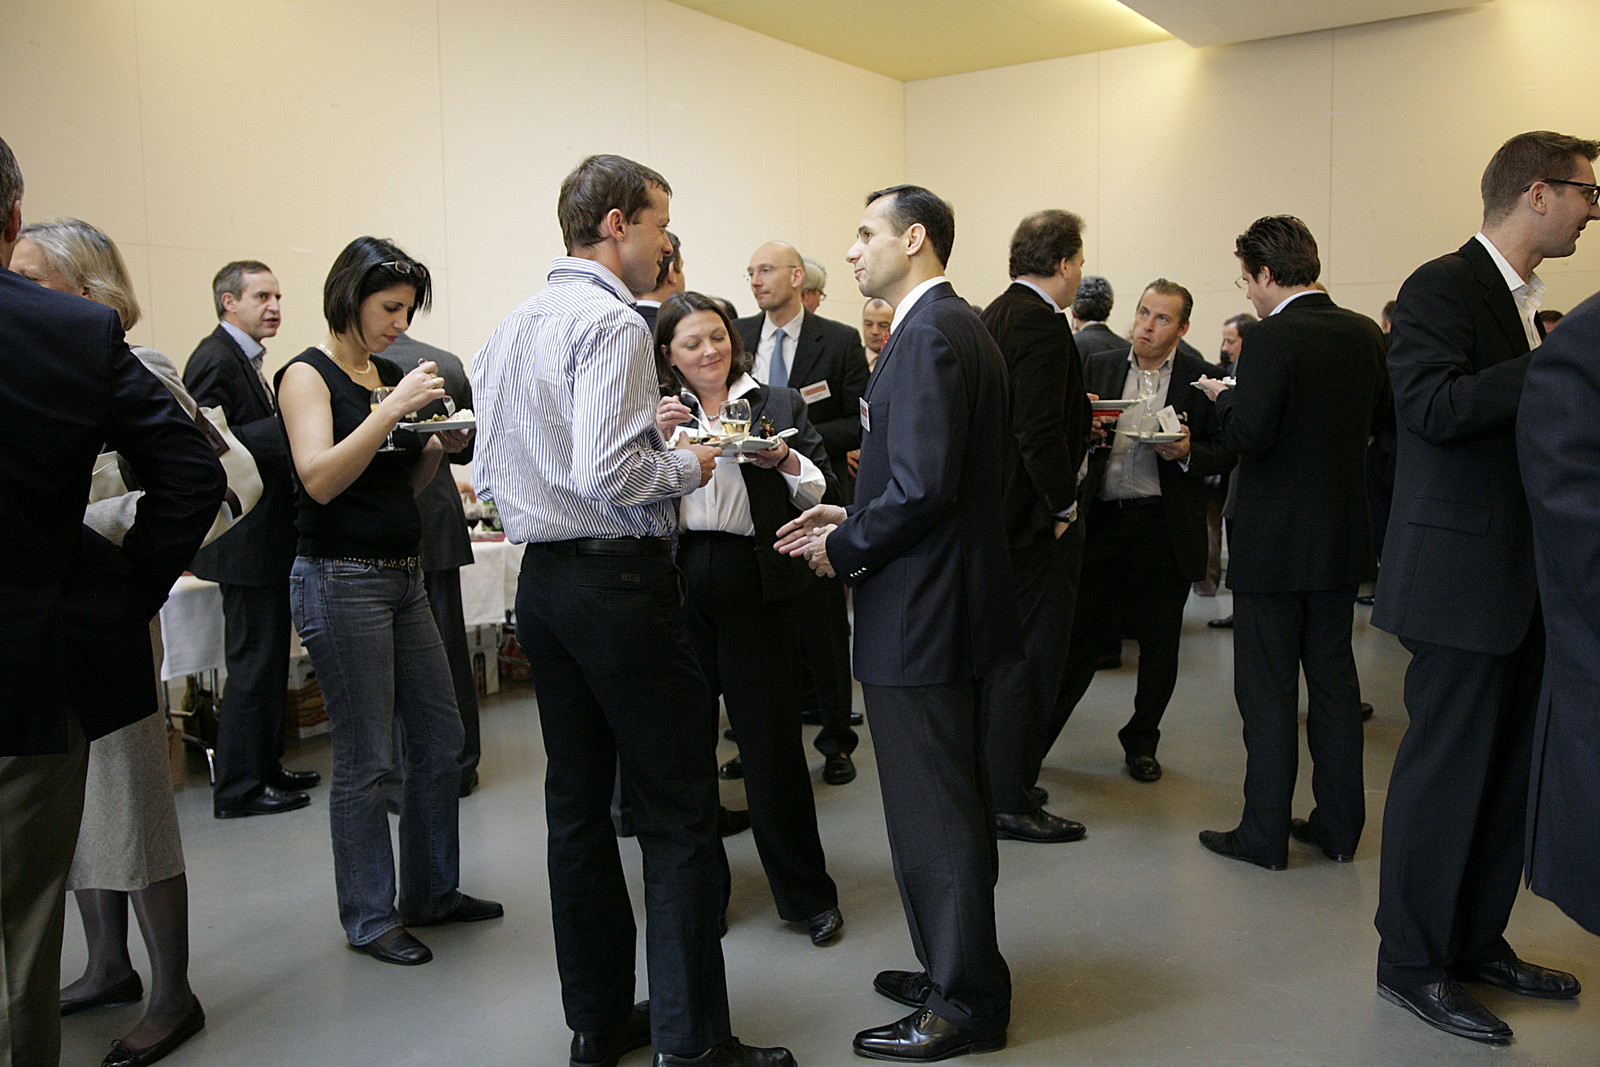 40 Networking lunch